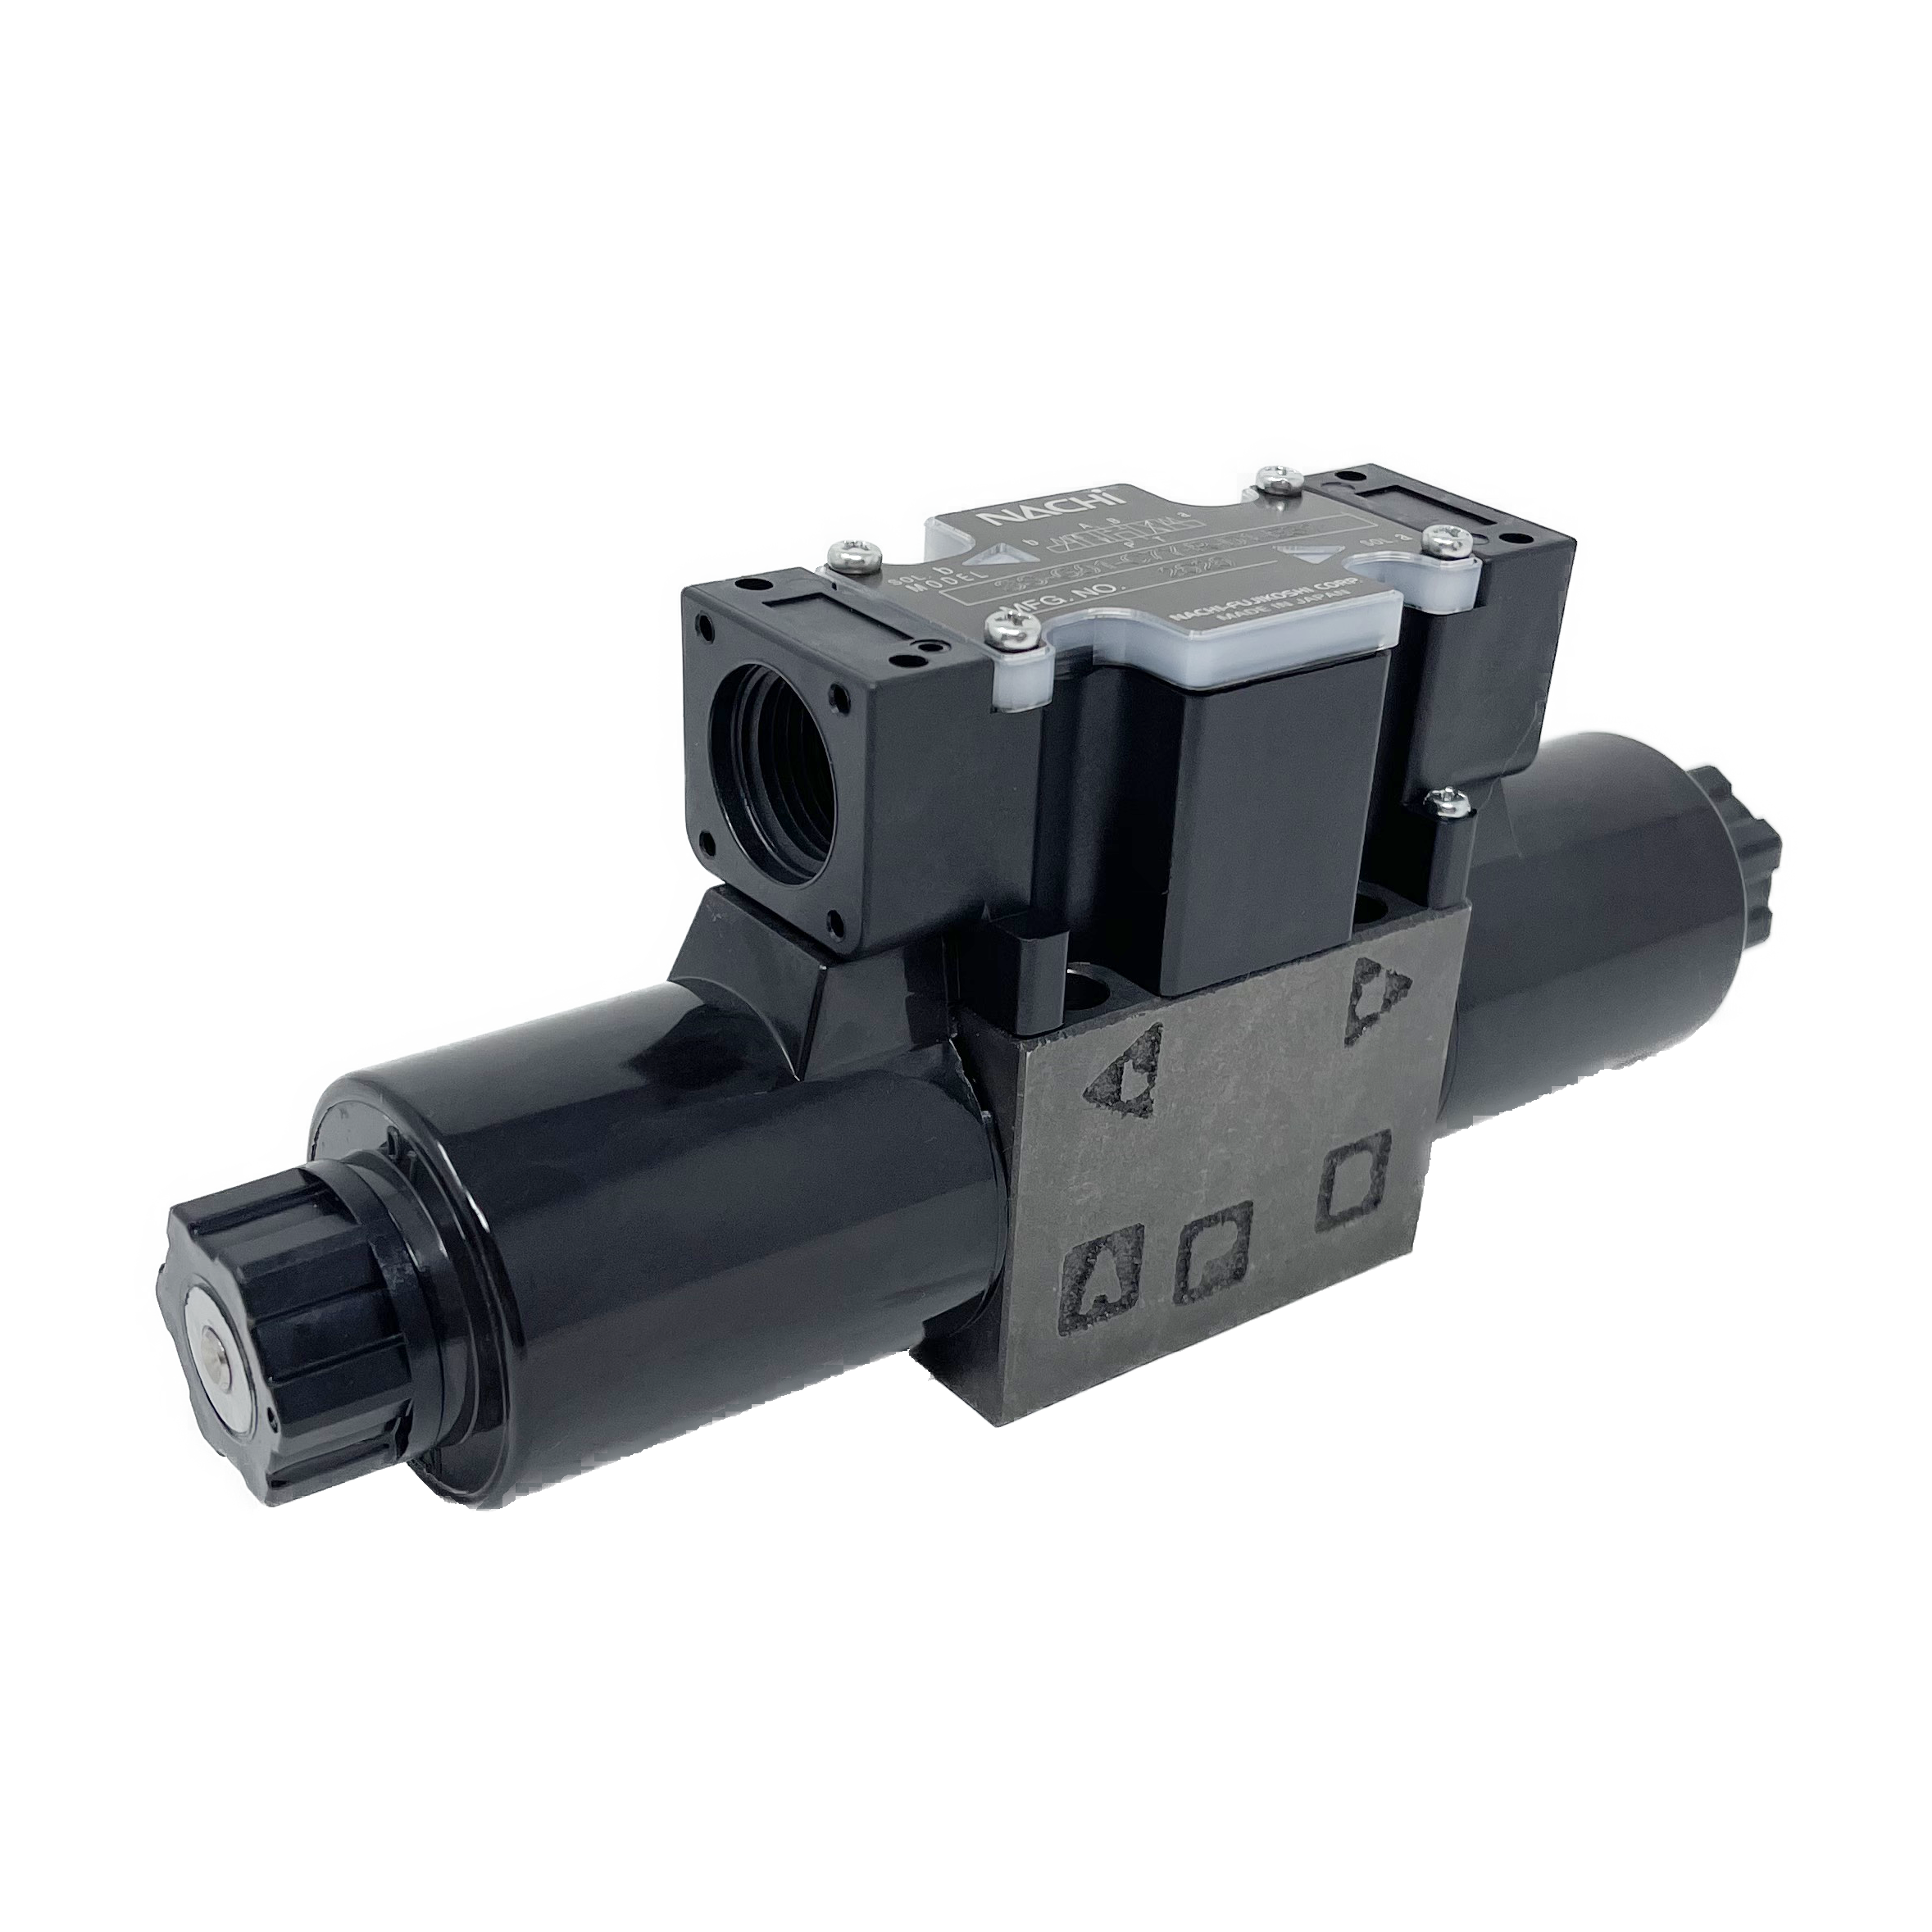 SS-G01-C5-R-E115-E31 : Nachi Solenoid Valve, 3P4W, D03 (NG6), 26.4GPM, 5075psi, All Ports Blocked Neutral, 115 VAC, Wiring Box with Lights & Built-in Rectifier